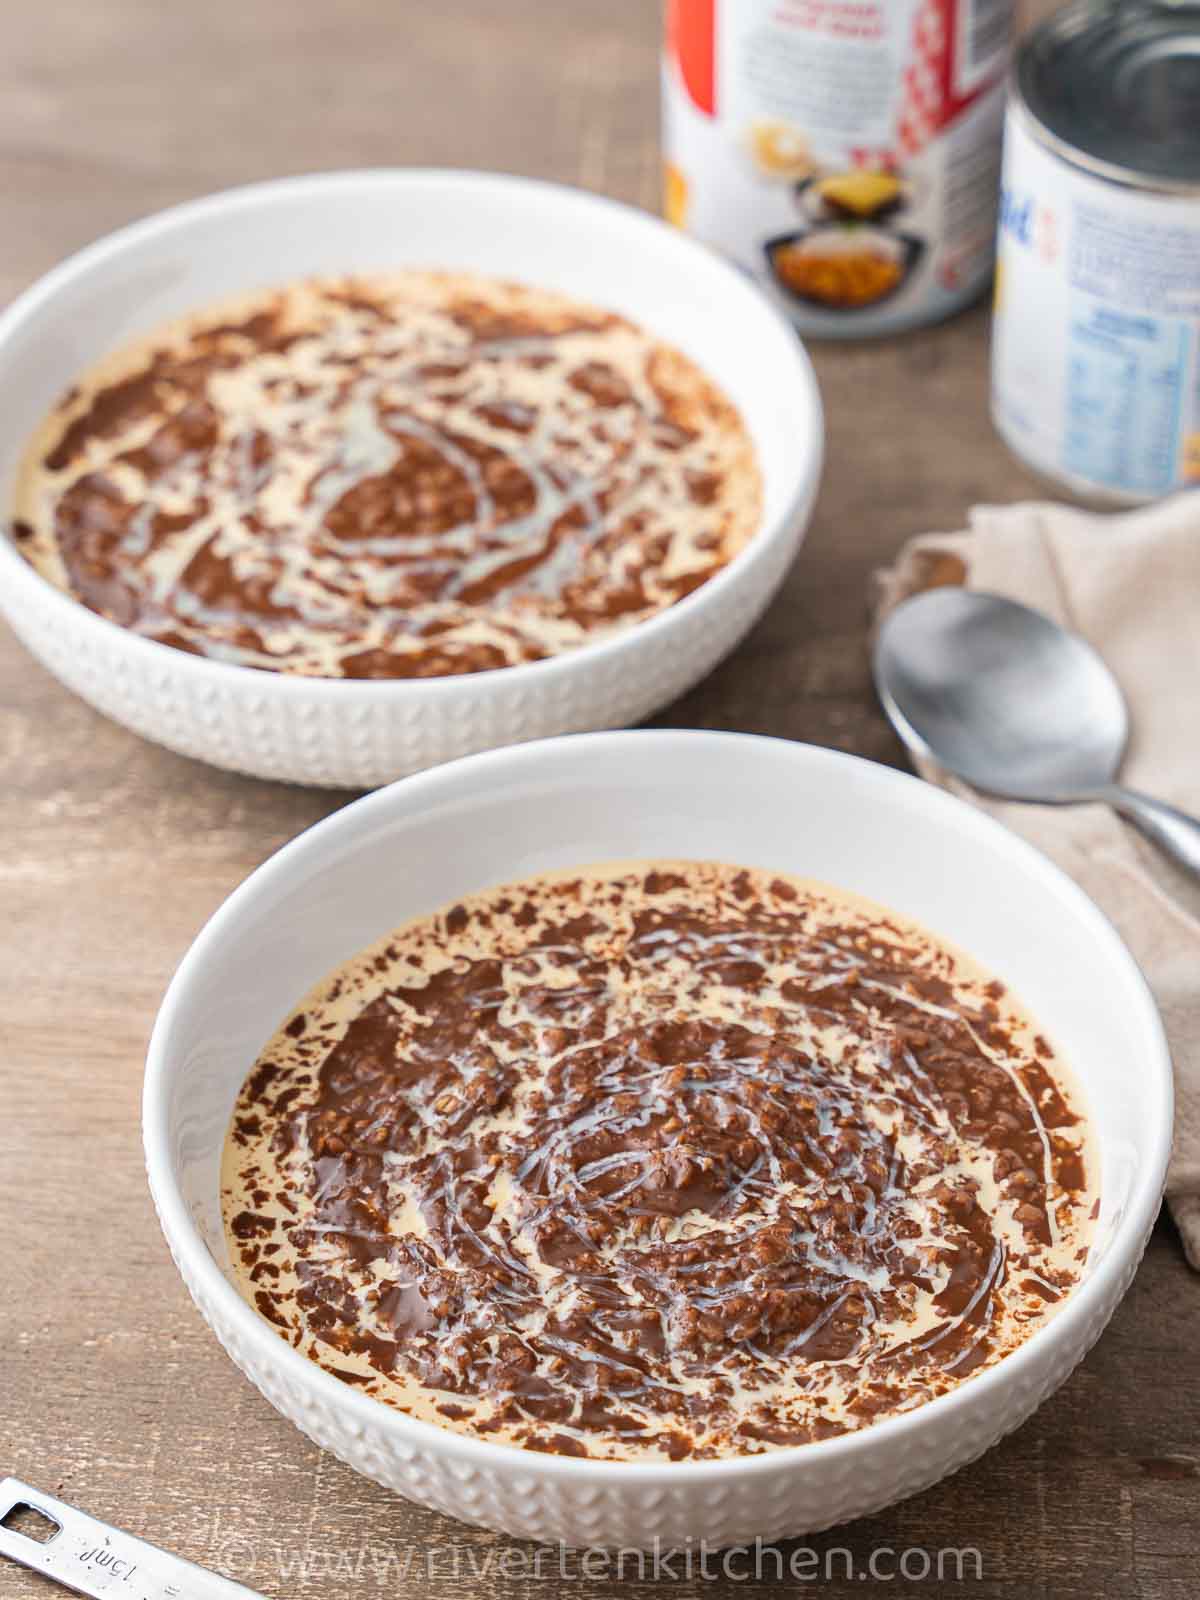 Chocolate porridge called Filipino Champorado. This is made of sticky glutinous rice and oatmeal drizzled with evaporated milk and condensed milk.